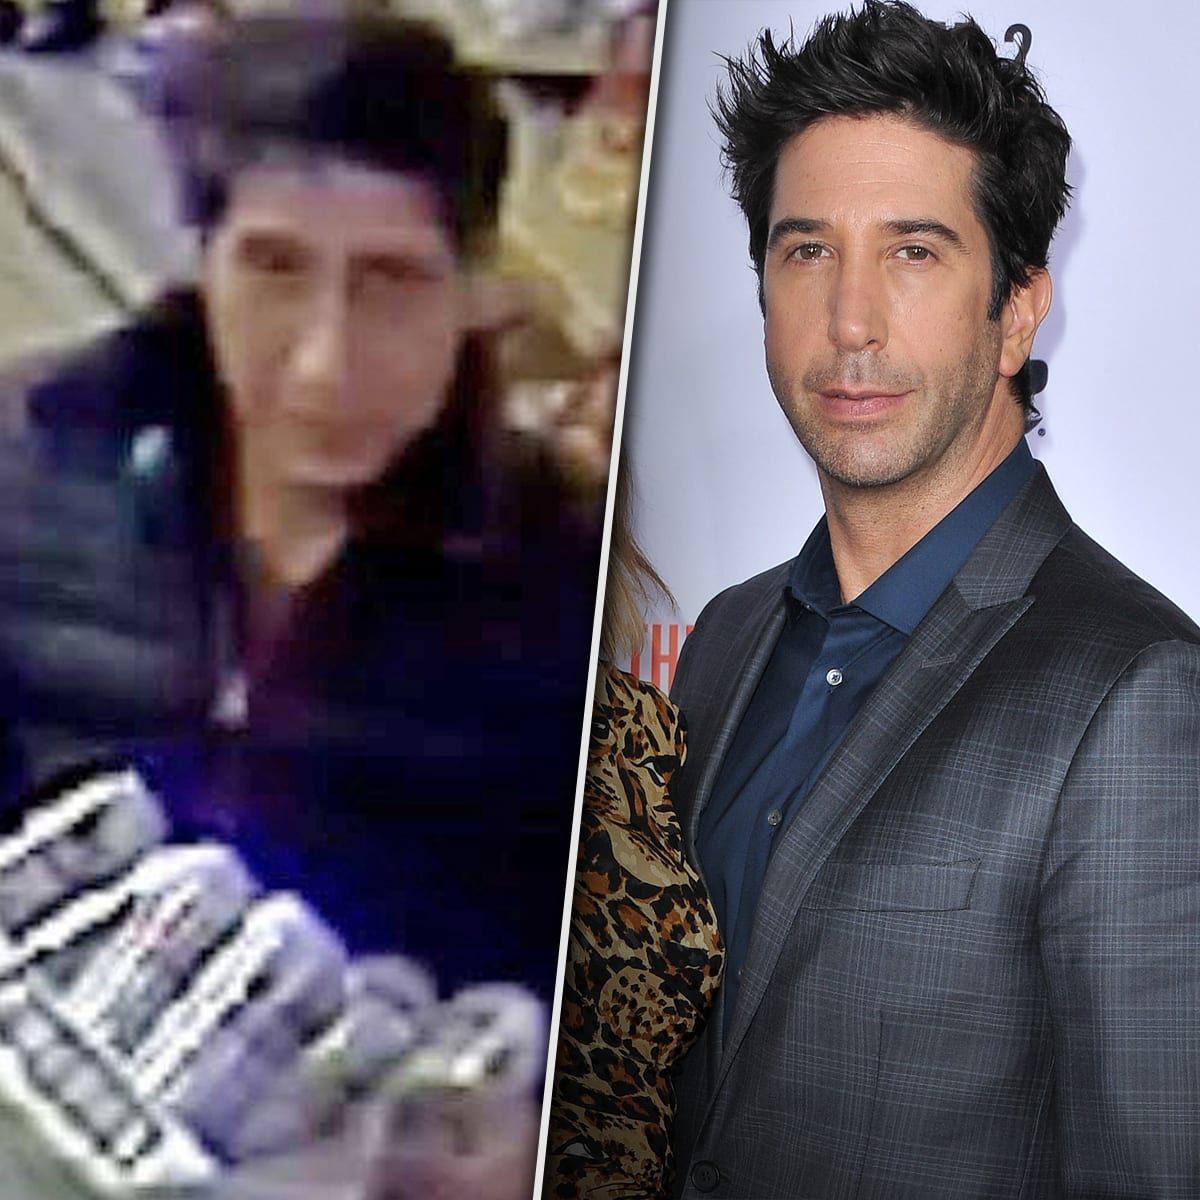 David Schwimmer lookalike shoplifting suspect wasn't there for his cou...